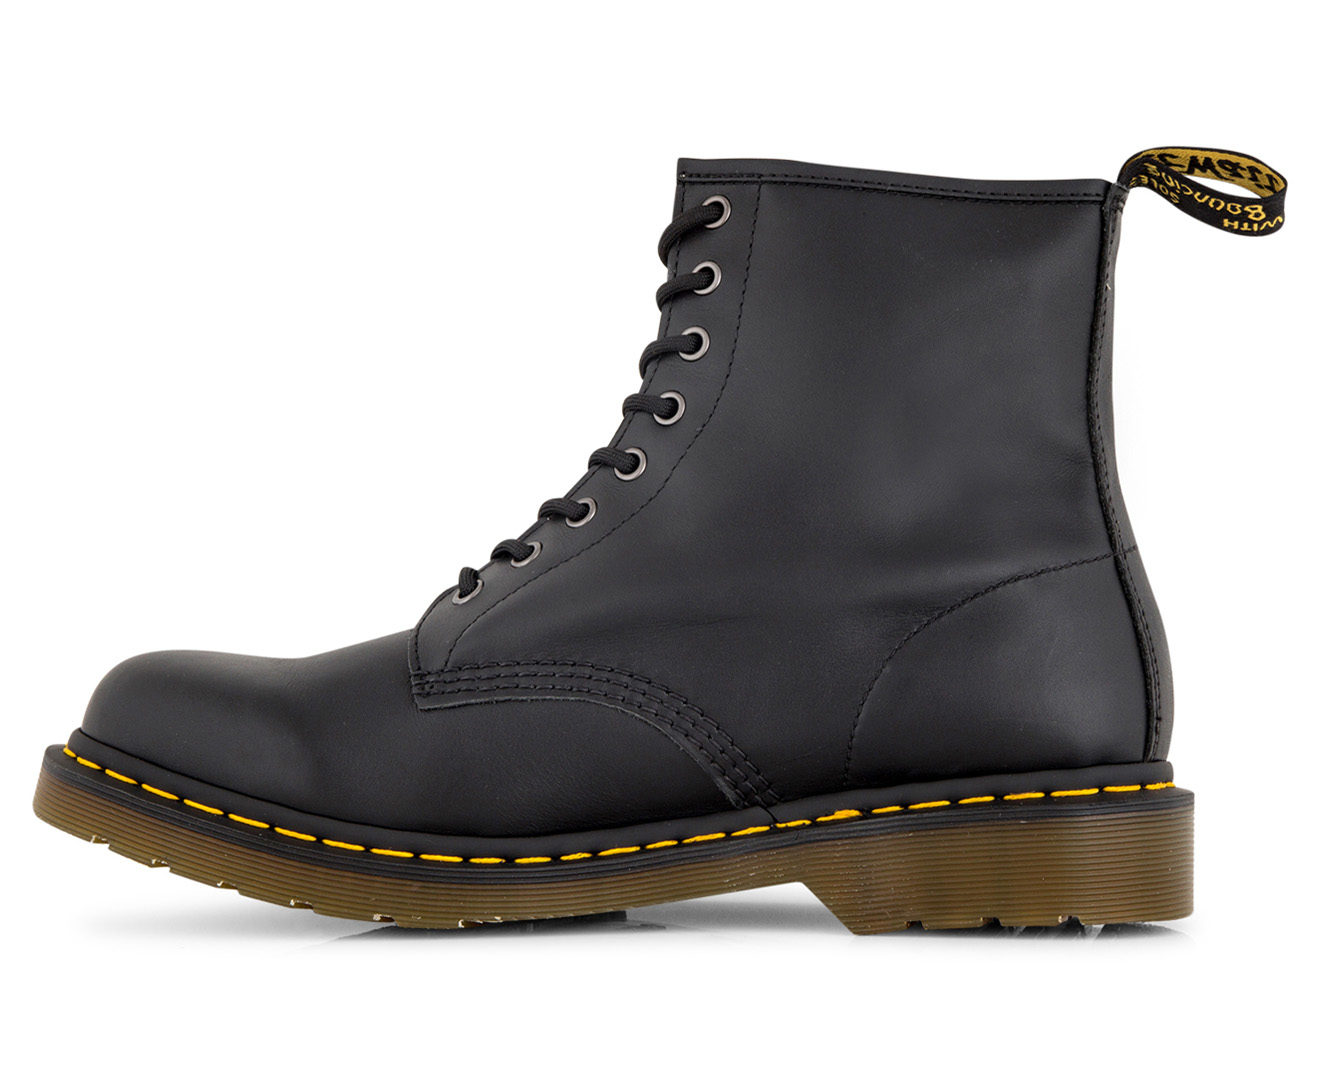 Dr. Martens Unisex 1460 8 Lace Up Leather Boots - Black Nappa | Catch ...